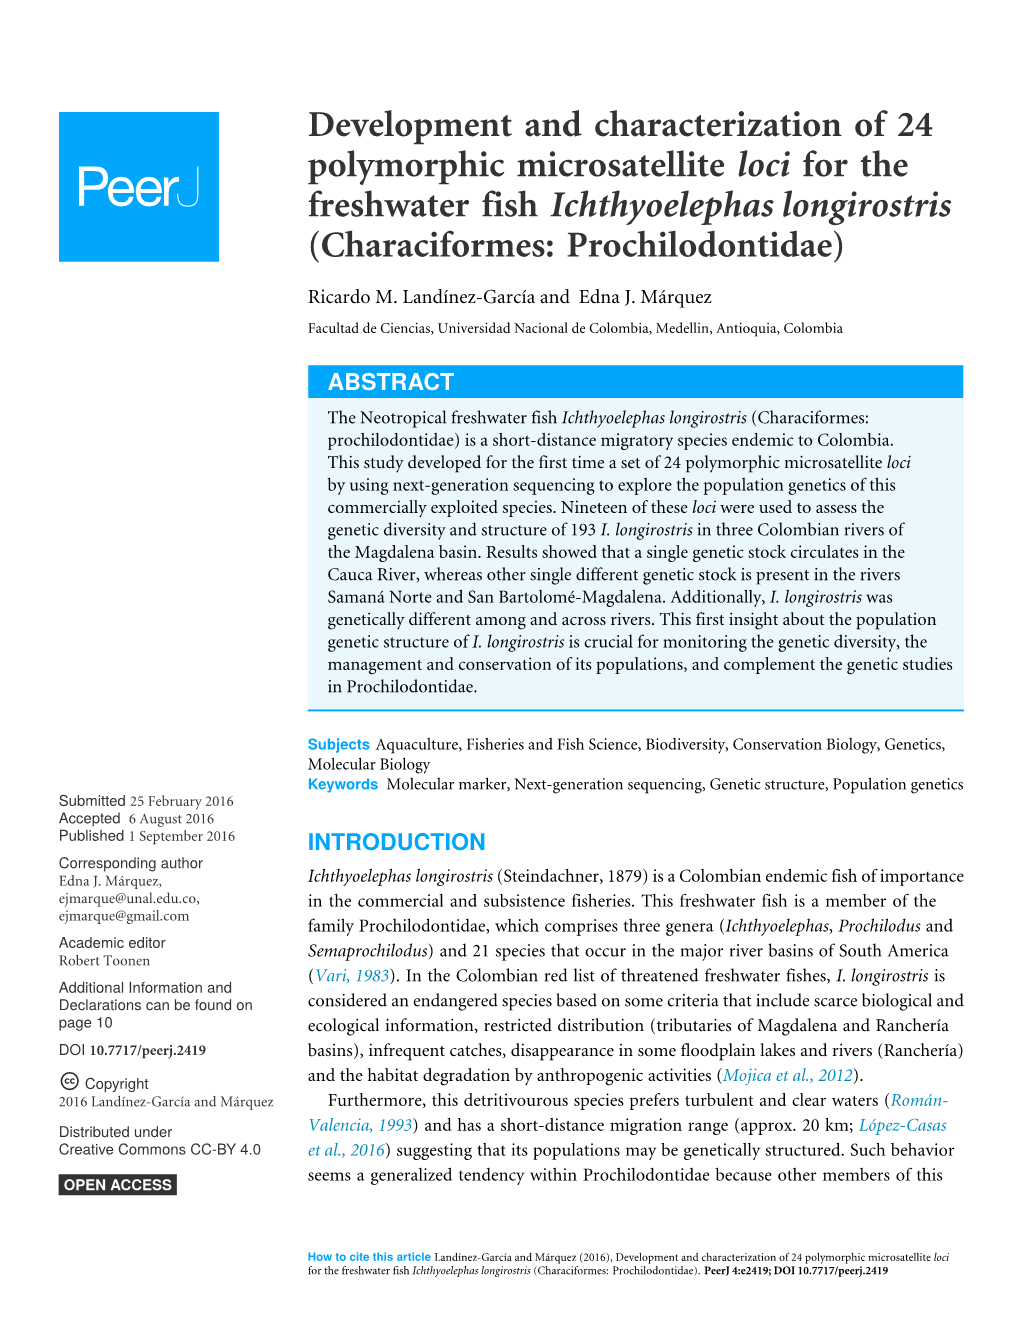 Development and Characterization of 24 Polymorphic Microsatellite Loci for the Freshwater Fish Ichthyoelephas Longirostris (Characiformes: Prochilodontidae)